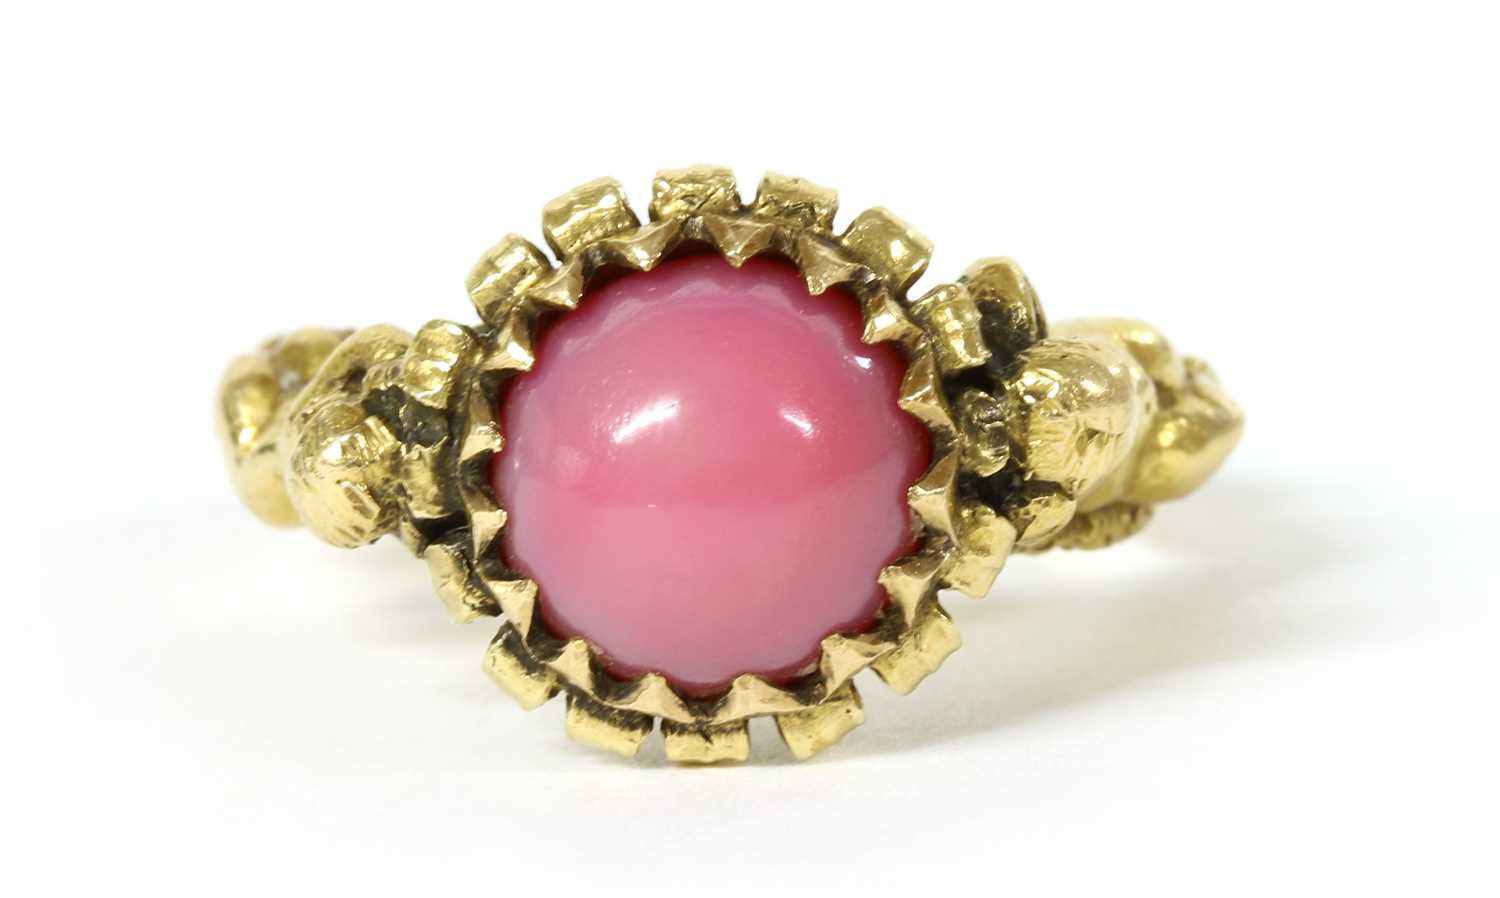 A Continental Renaissance Revival gold ring in the style of Jules Wièse, - Image 3 of 3